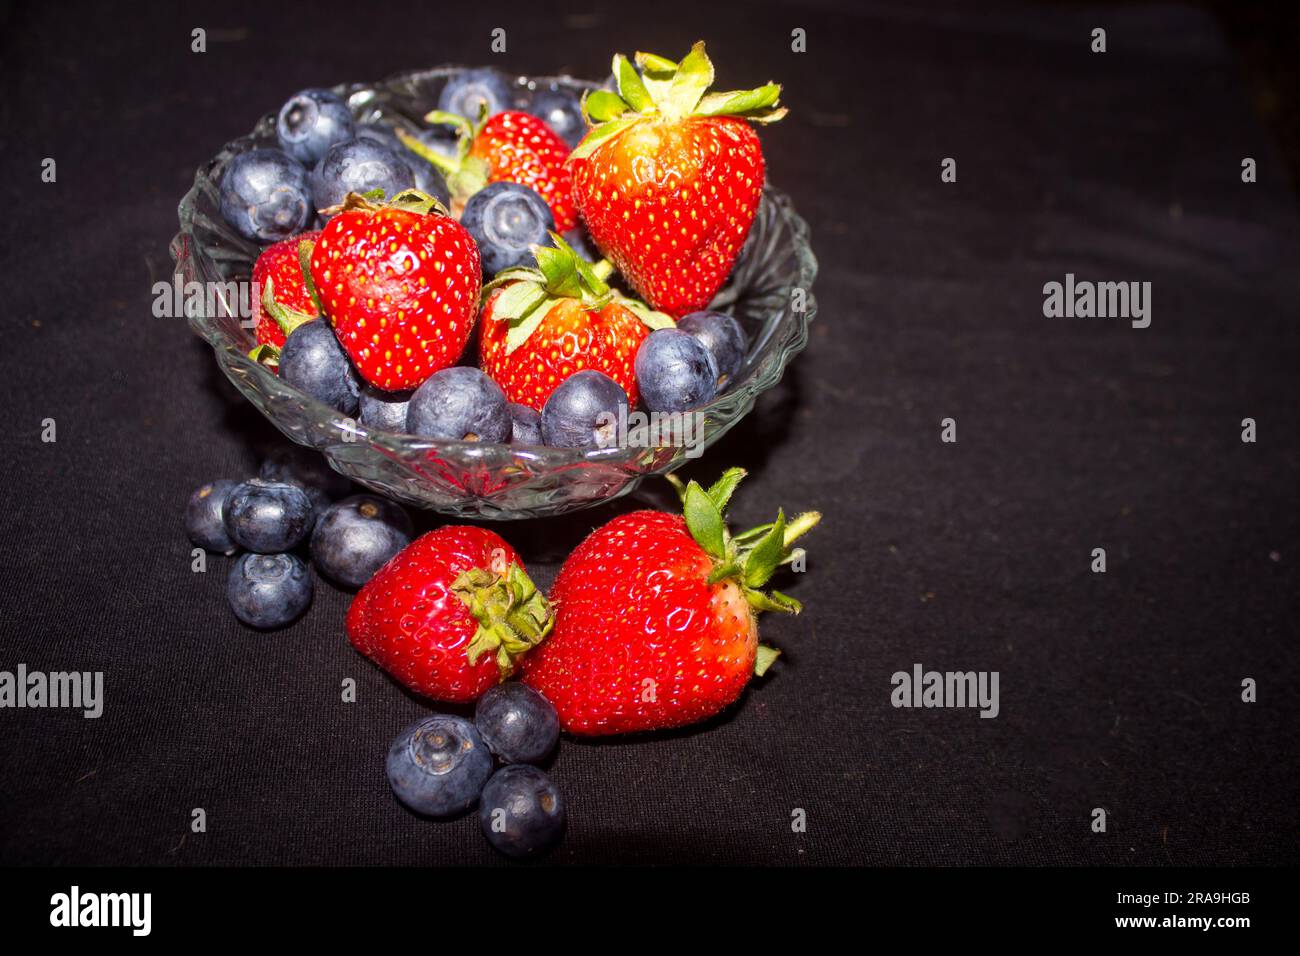 Bowl of summer berries, Strawberries and blueberries, against a black background Stock Photo